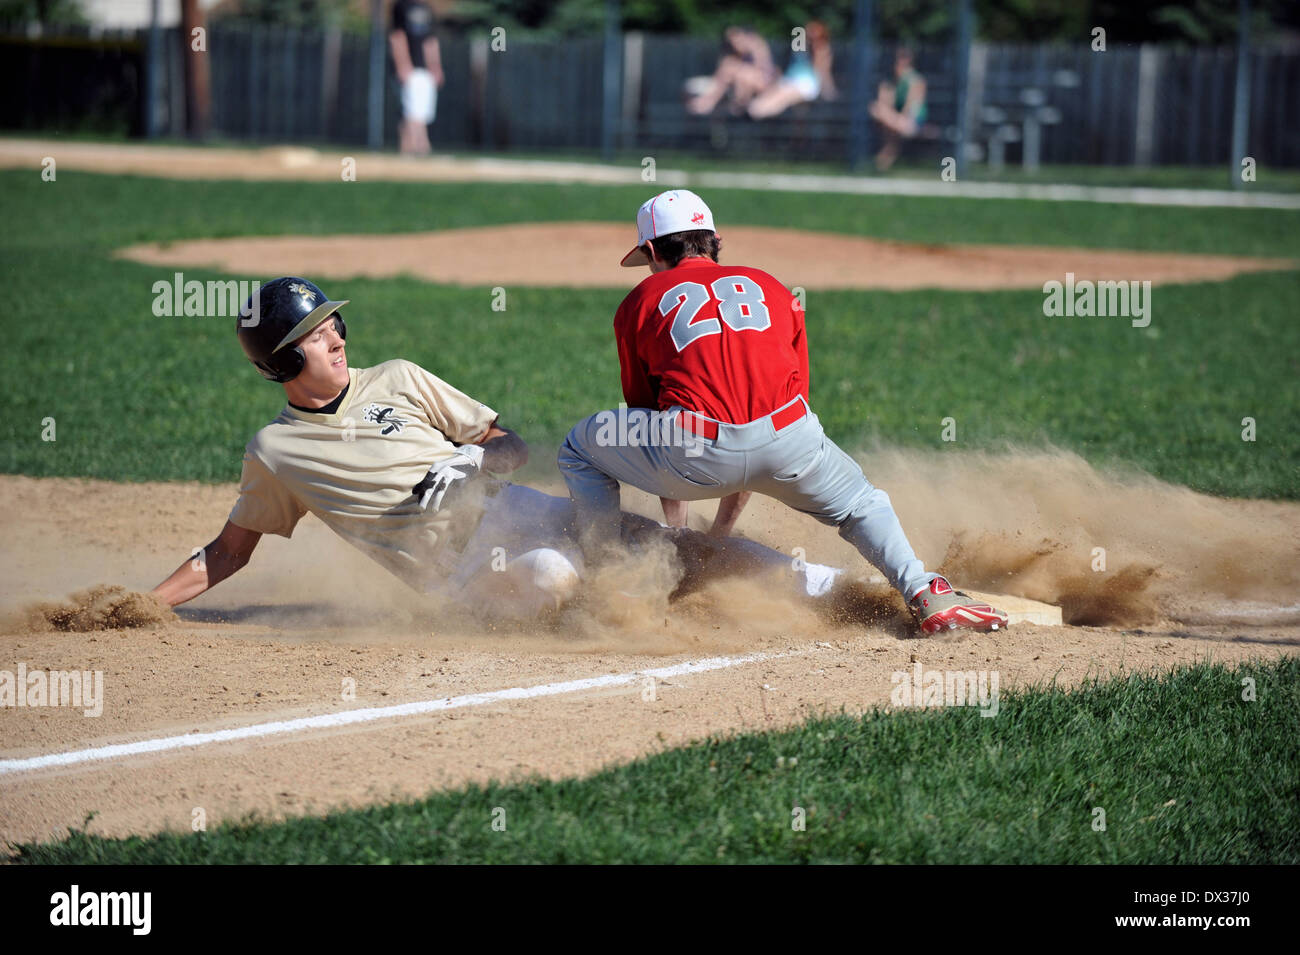 Sport Baseball Runner attempting a steal of third base outed Streamwood Illinois Stock Photo